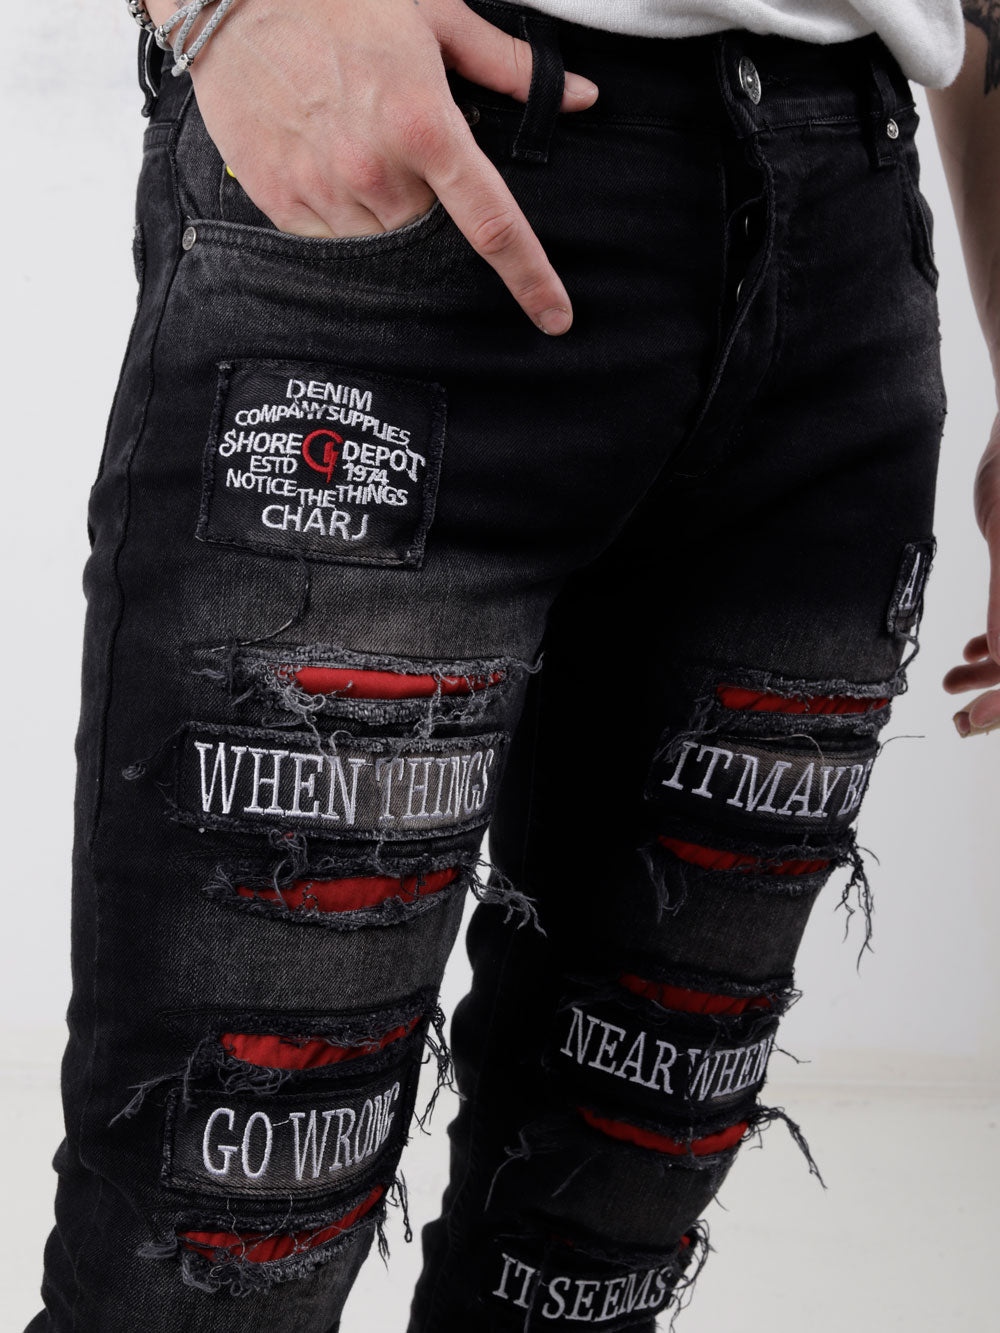 A man wearing a pair of PAW TRAIL jeans with red patches on them.